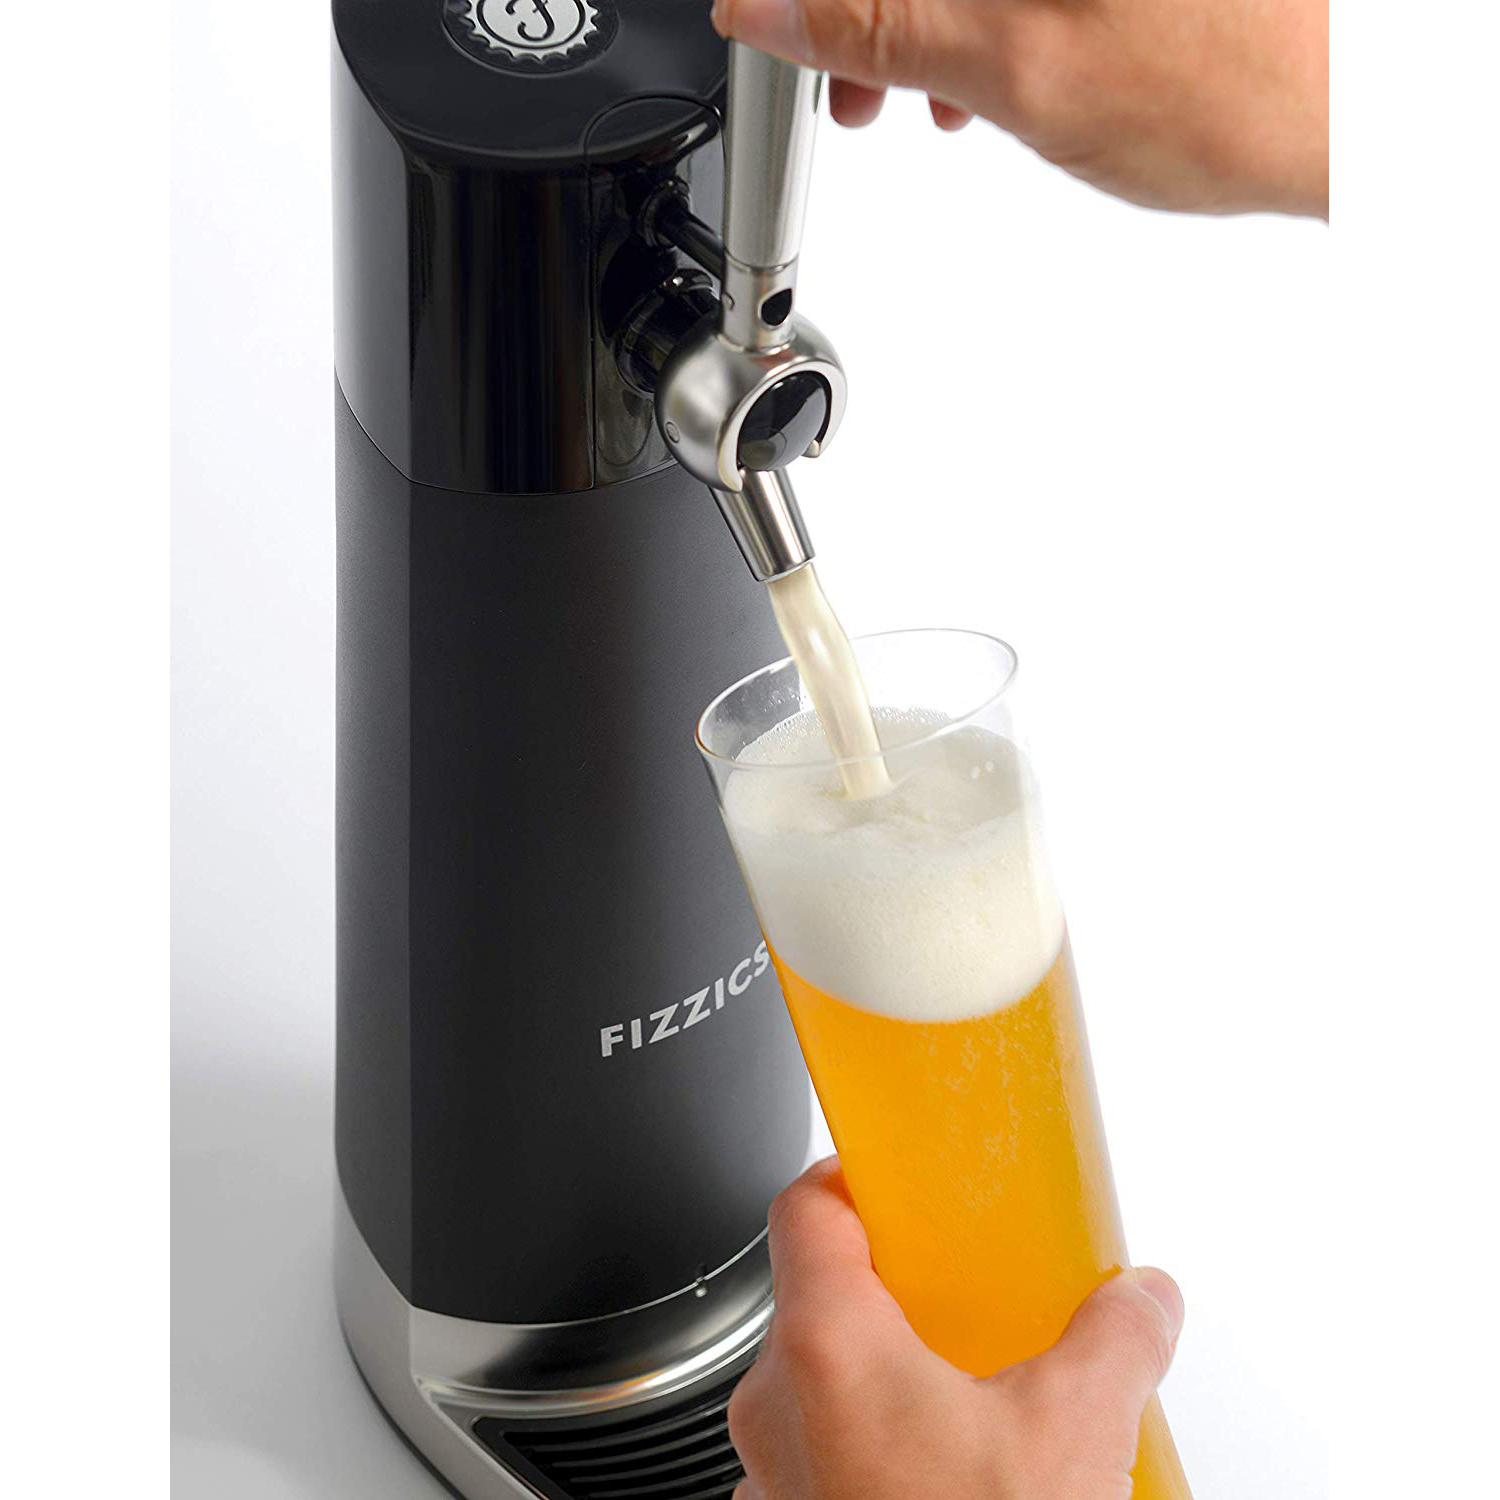 Fizzics FZ403 DraftPour Nitro-Style USB-Powered Home Bar Beer Tap Dispenser - image 4 of 6